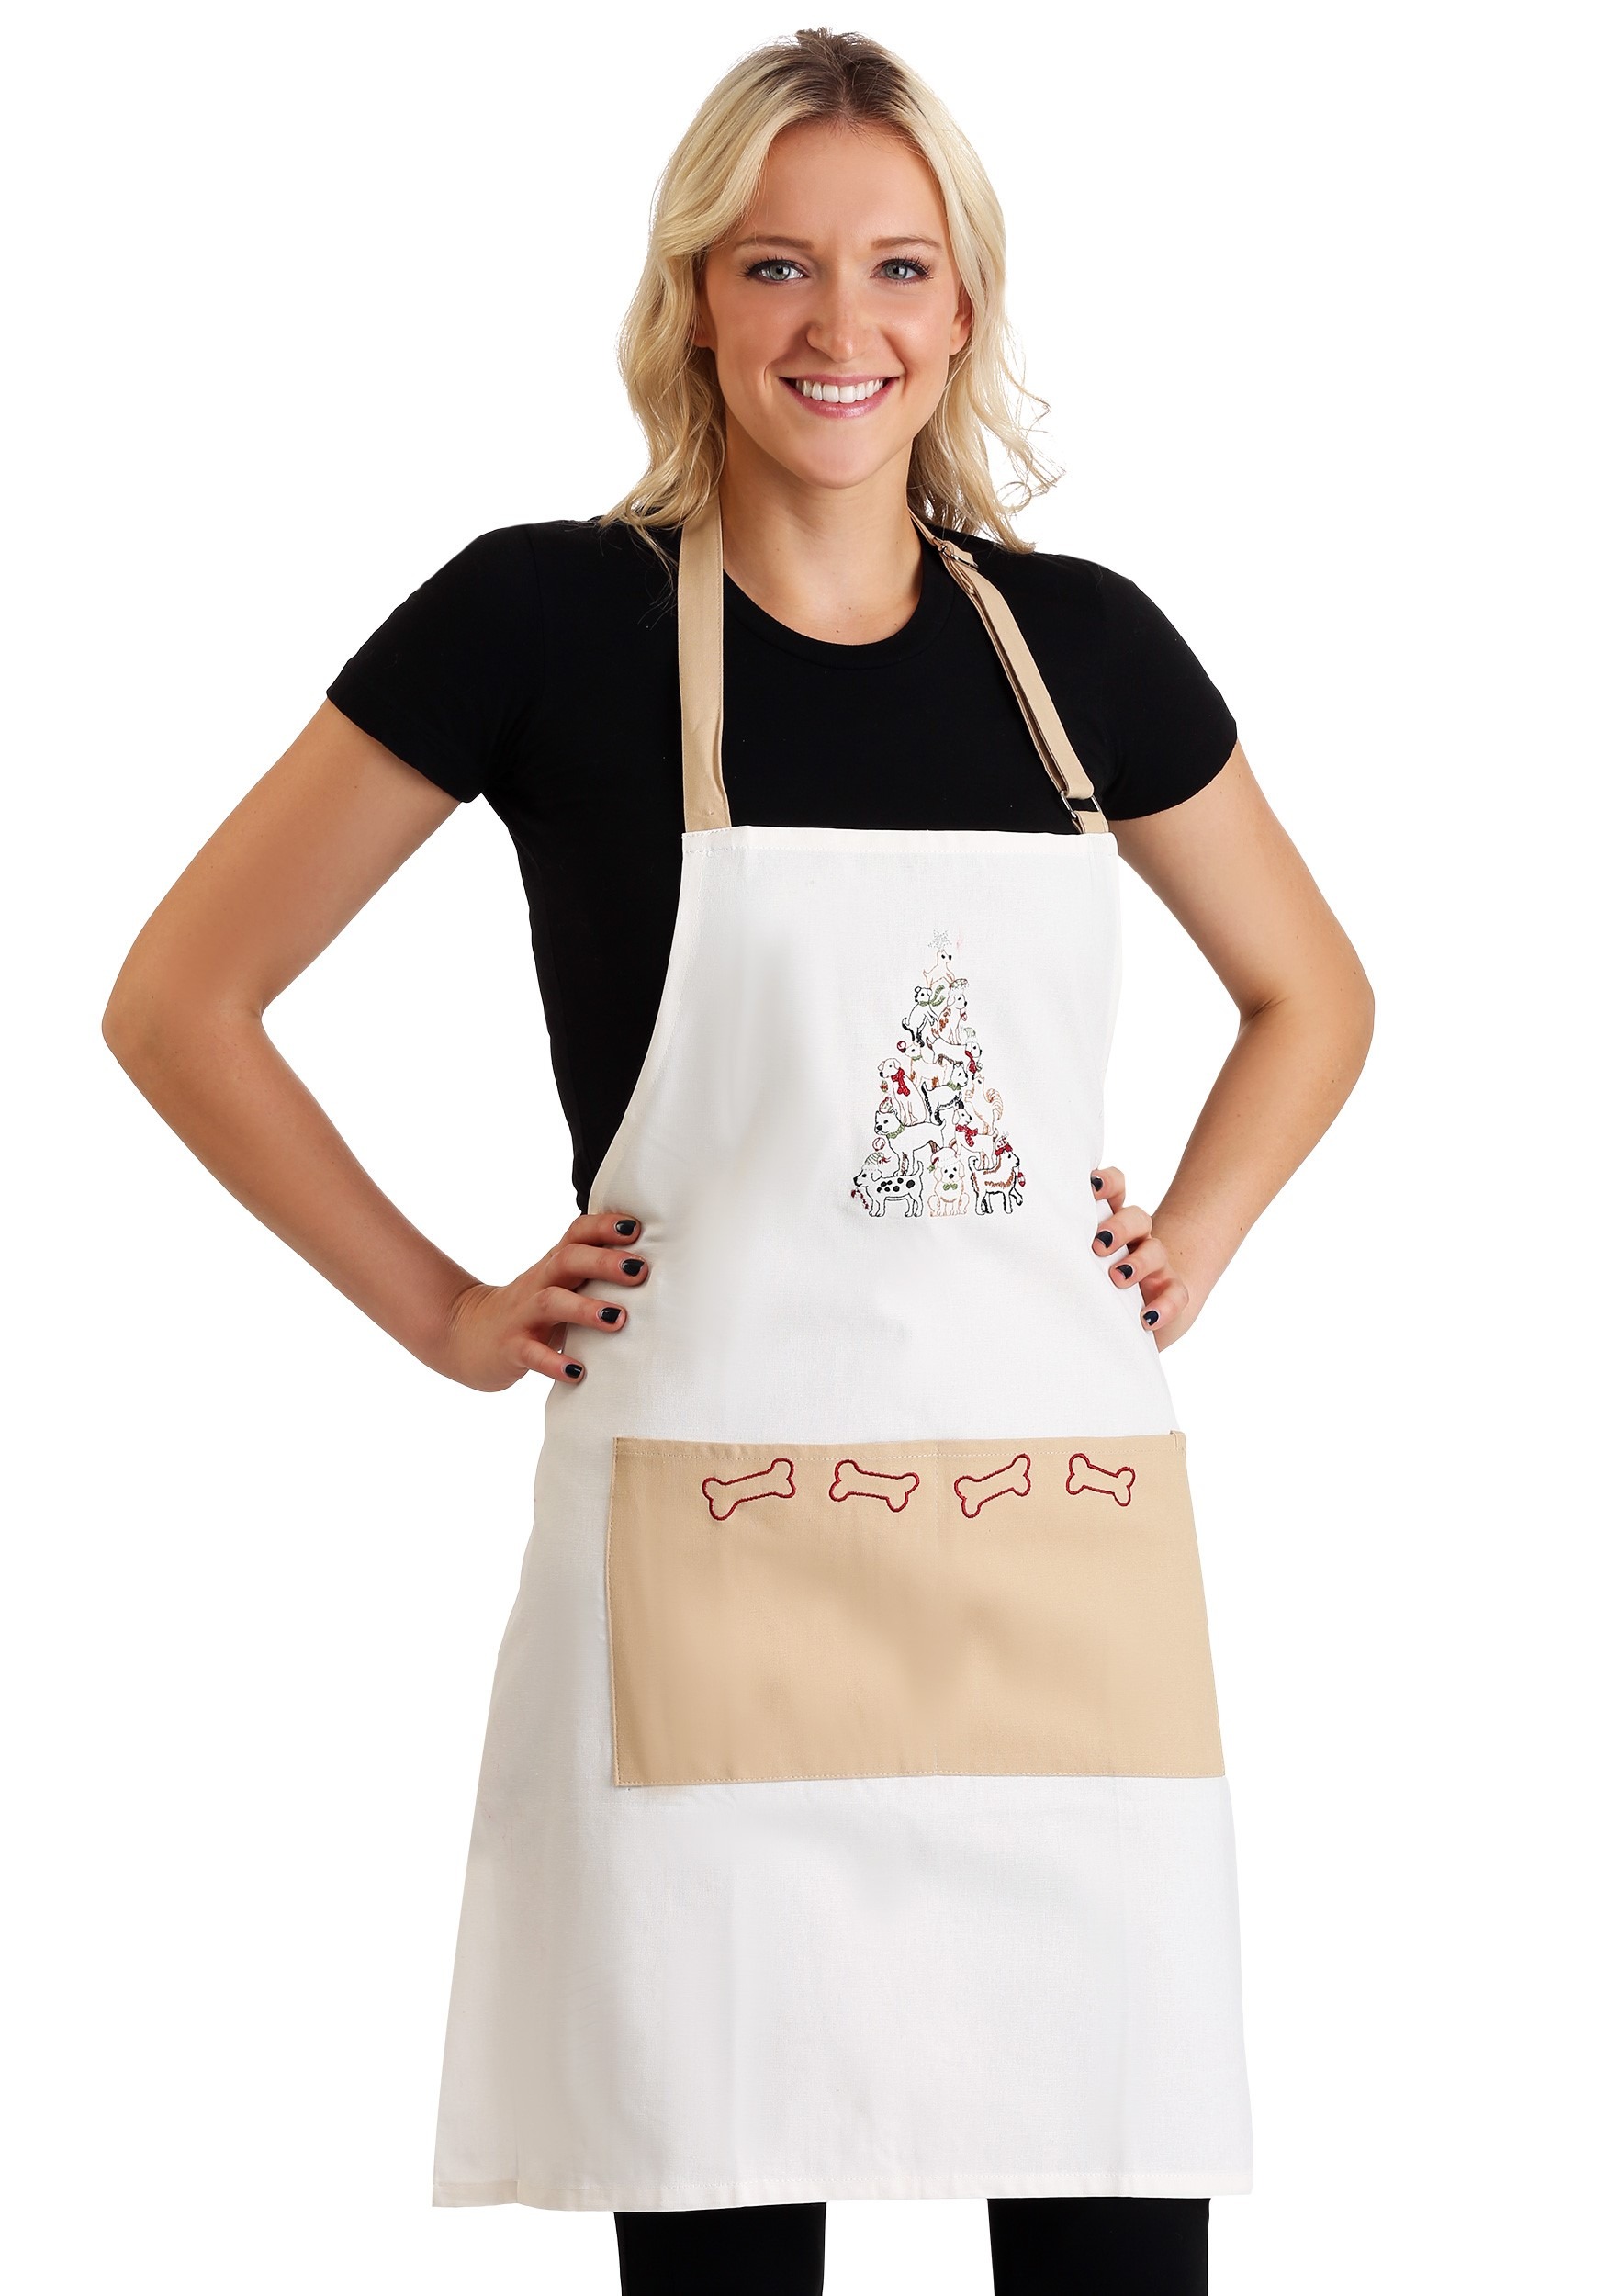 Embroidered Puppy Christmas Tree Apron